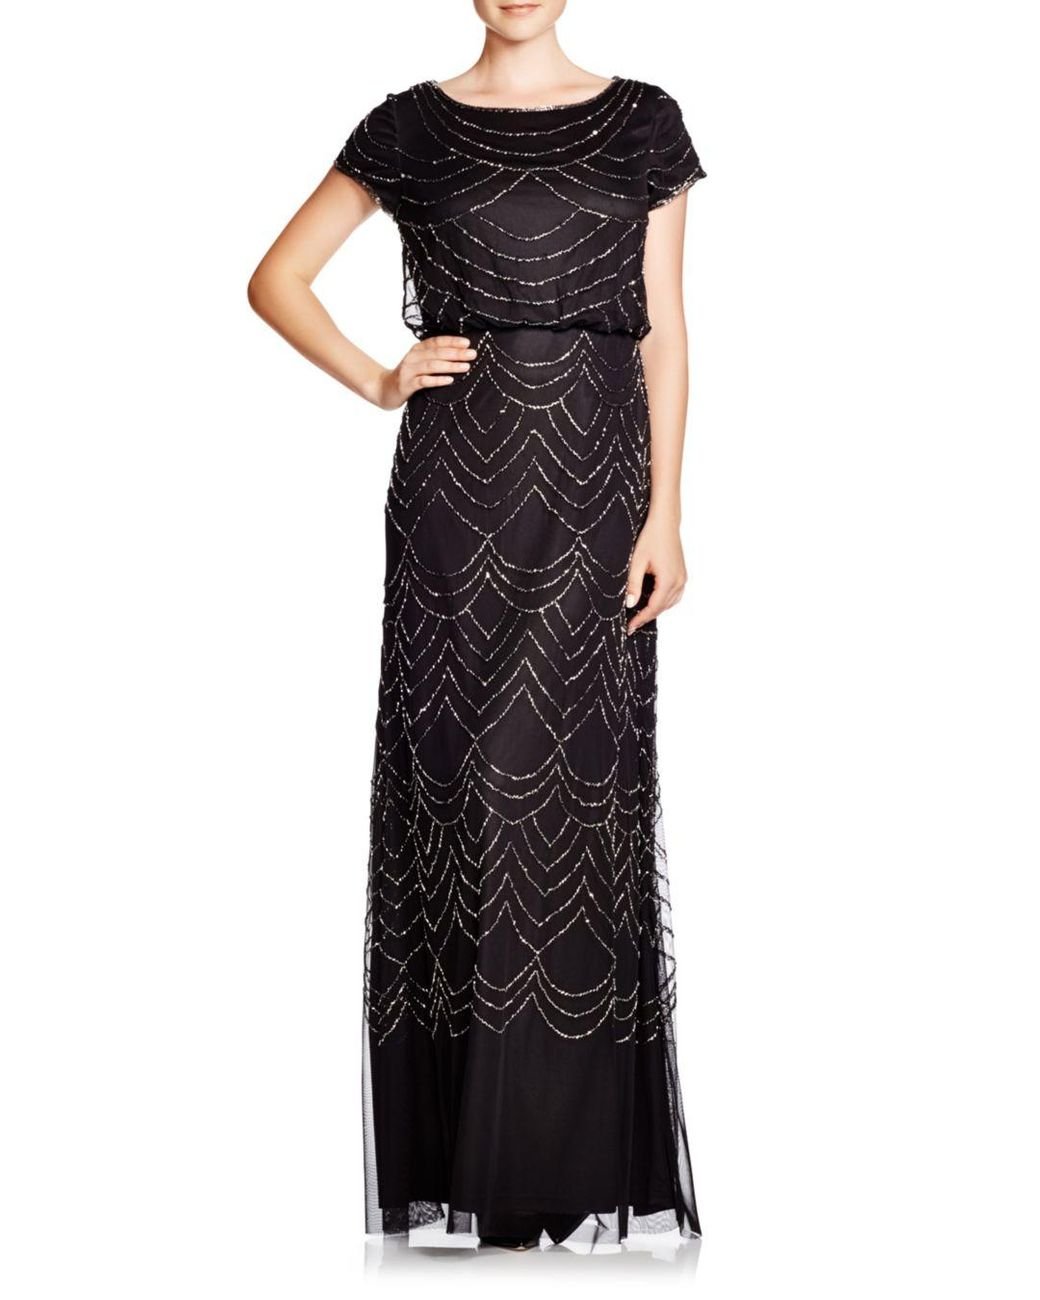 Adrianna Papell Synthetic Short Sleeve Beaded Blouson Gown in Black | Lyst